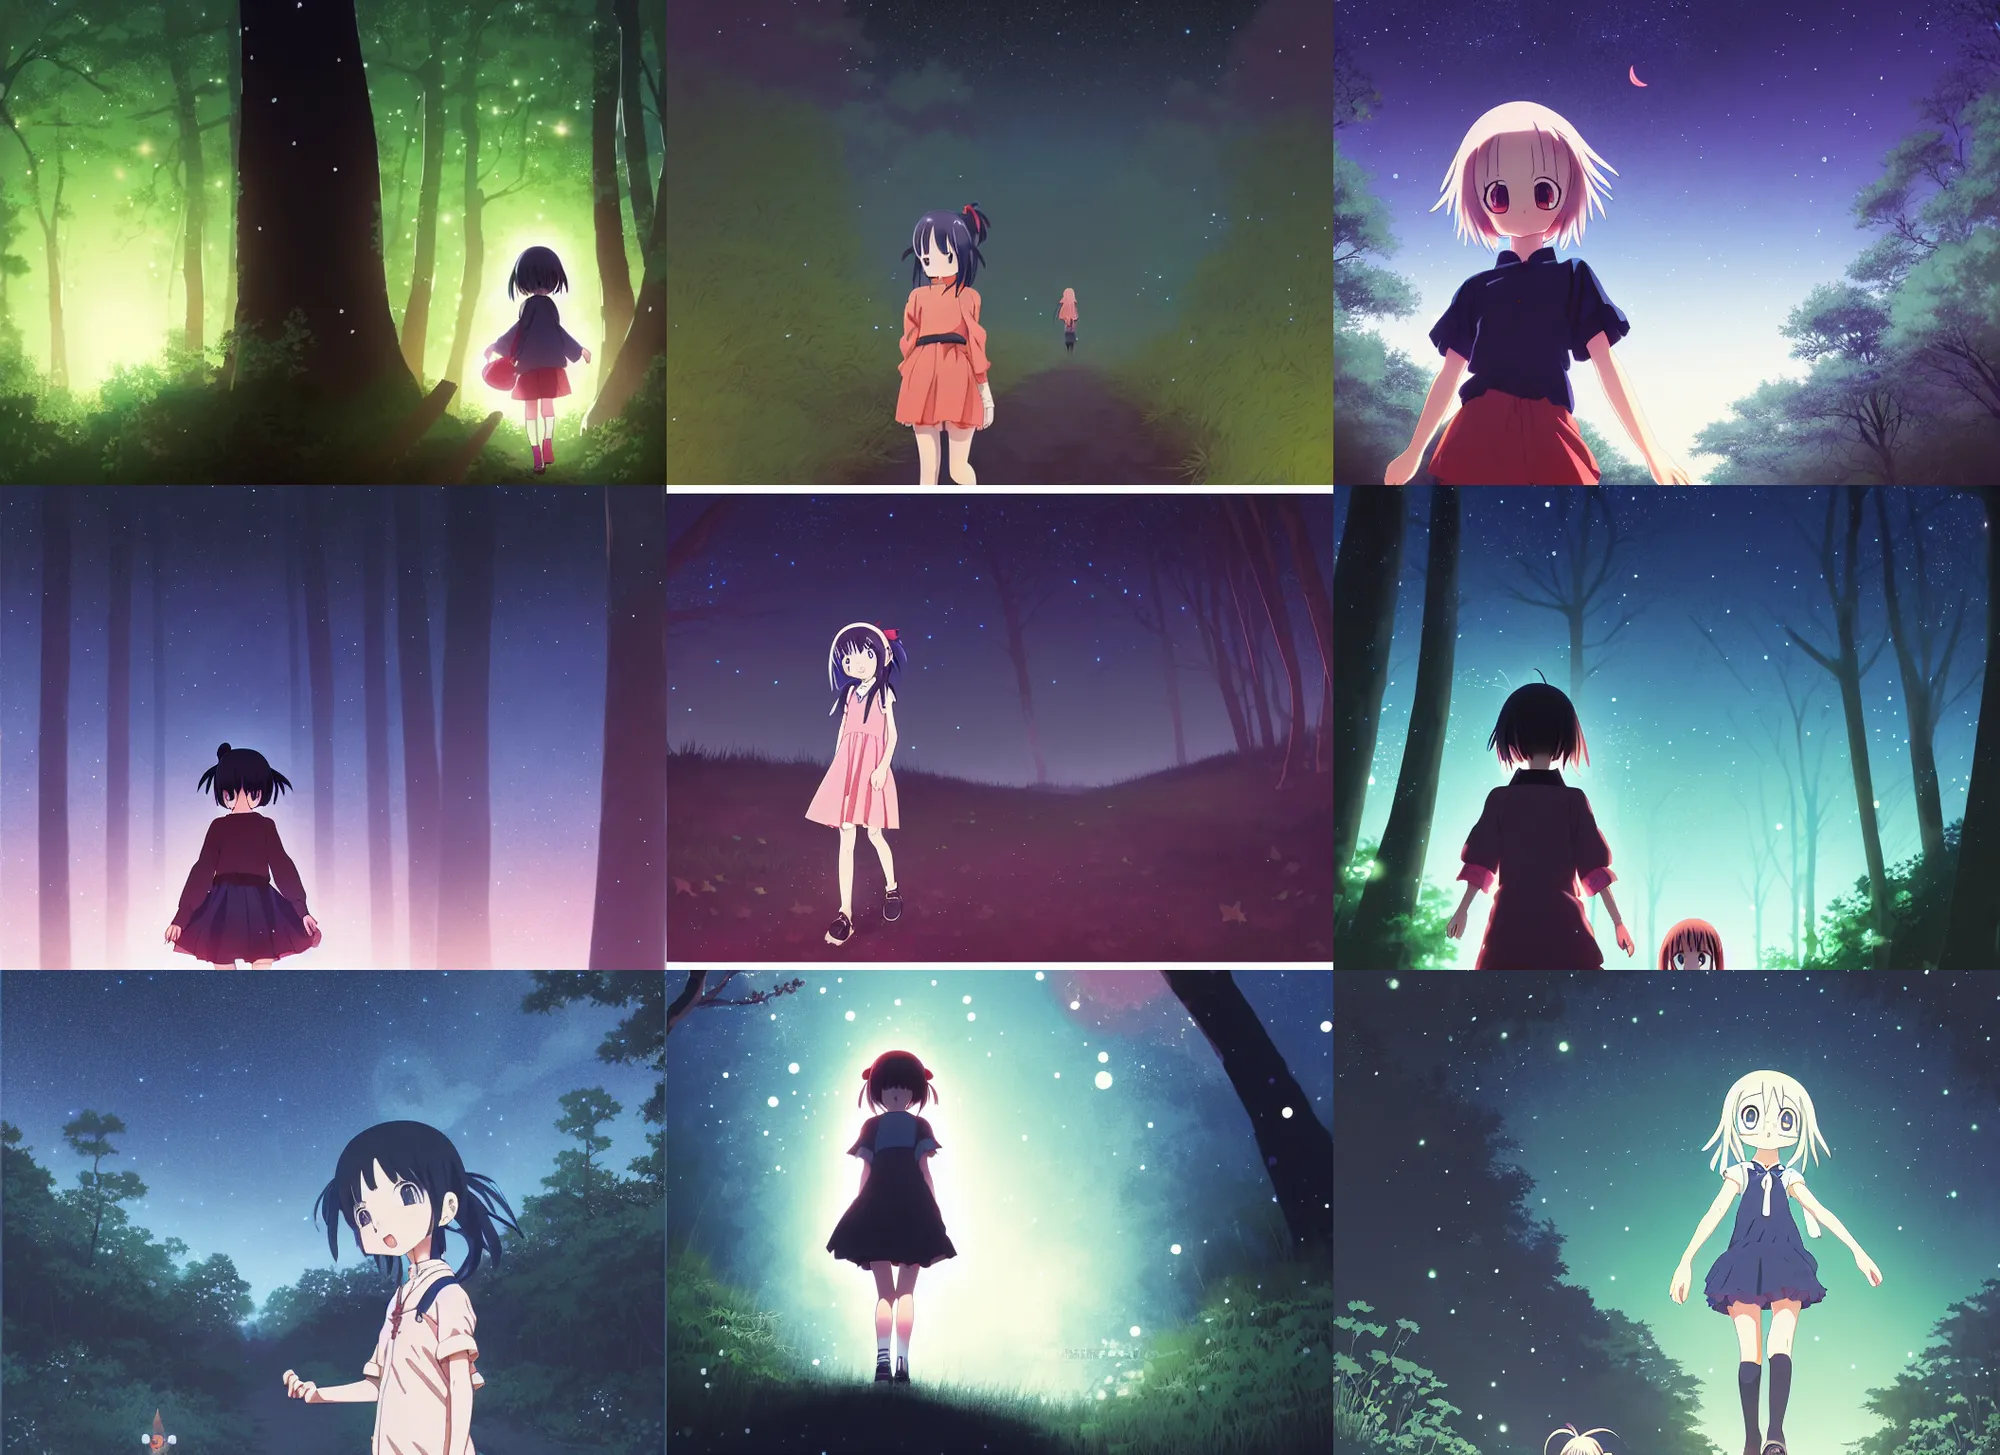 Prompt: anime visual, portrait of a curious girl walking in a forest at night, night sky, very dark, ncute face by mamoru hosoda, ilya kuvshinov, yoh yoshinari, dynamic pose, dynamic perspective, rounded eyes, kyoani, smooth facial features, dramatic lighting